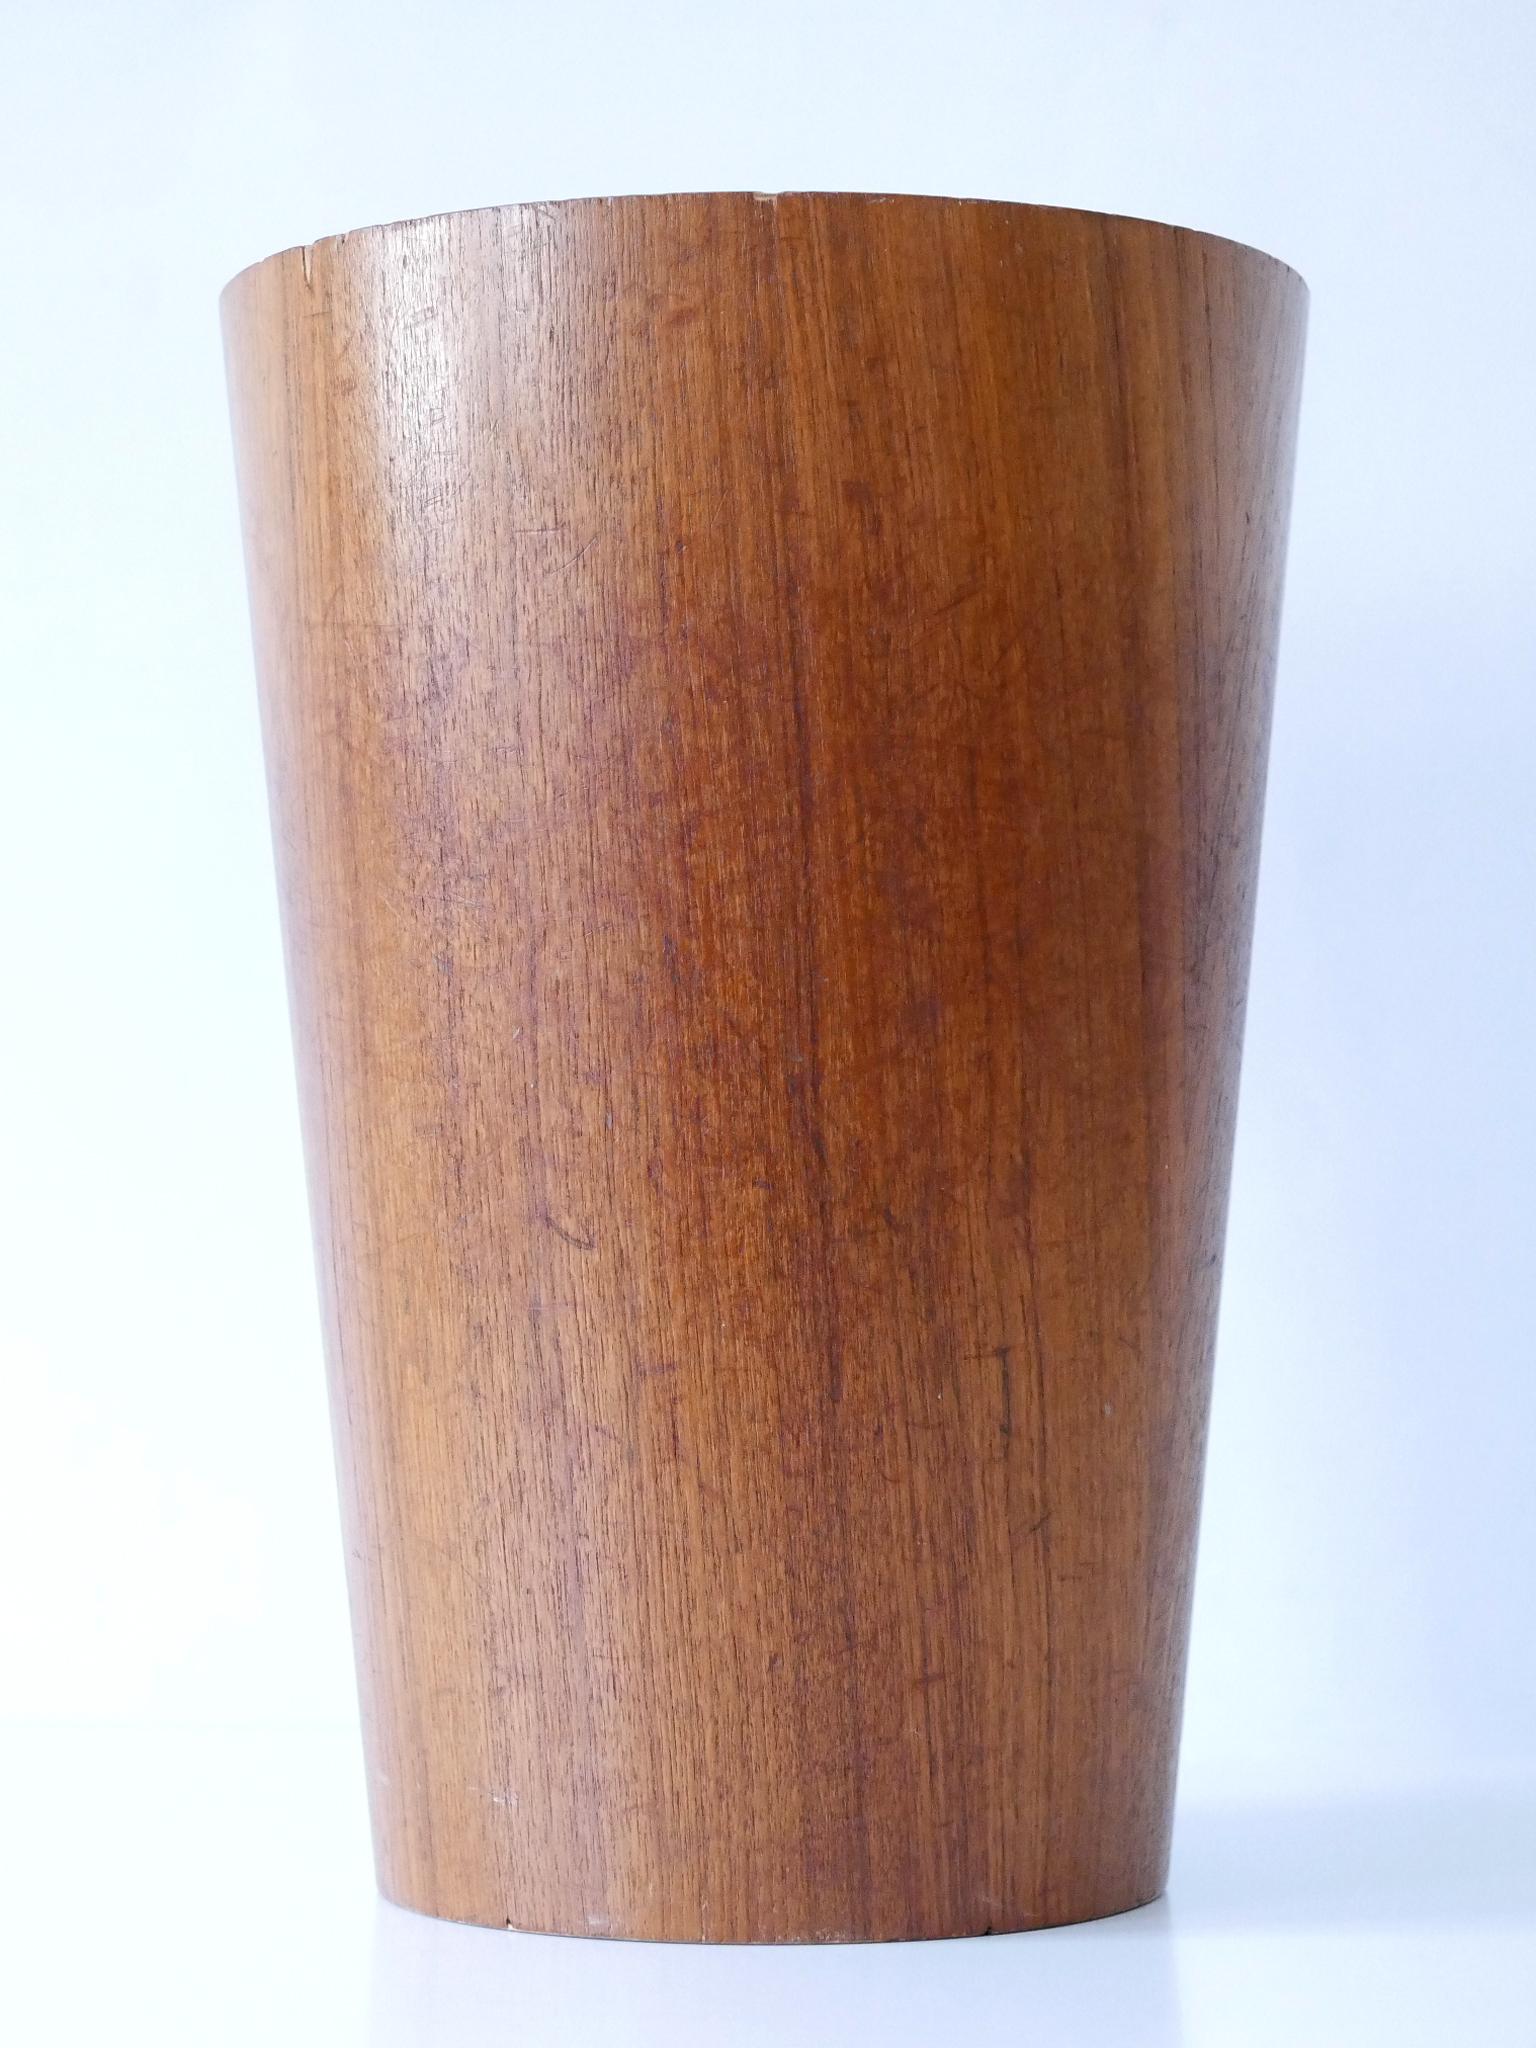 Rare and highly decorative Mid Century Modern teak waste paper bin or basket. Designed by Martin Åberg for Servex, Sweden, 1960s. 

Executed in teak.

Measurements:
Diameter: 10.83 in. (27.5 cm)
Height: 15.75 in. (40 cm)

Weight ca. 1